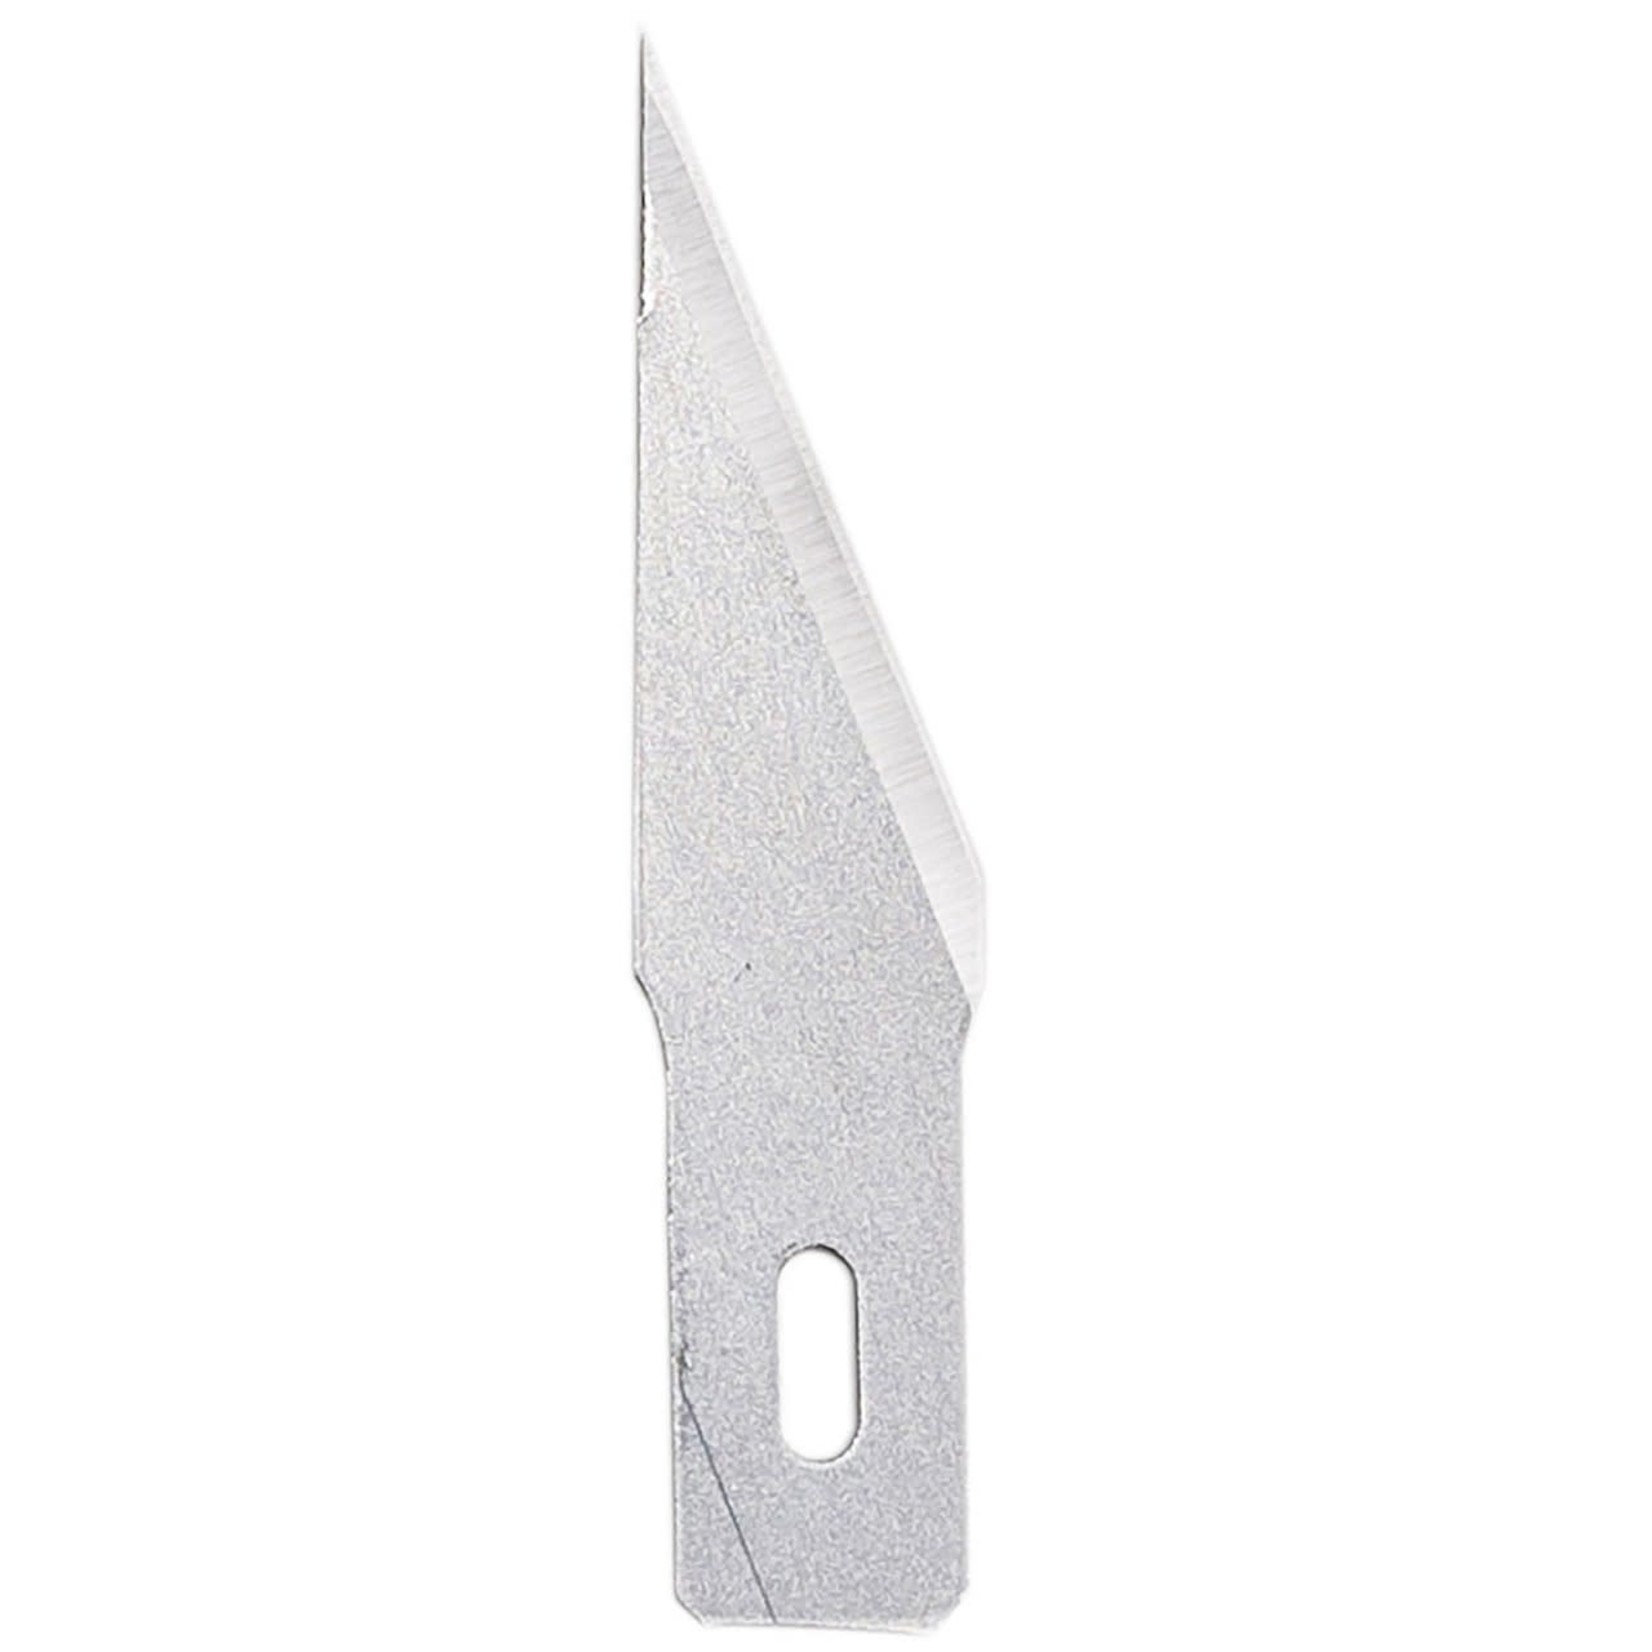 EXC20002 Pointed Blade B2 Heavy 5 pk